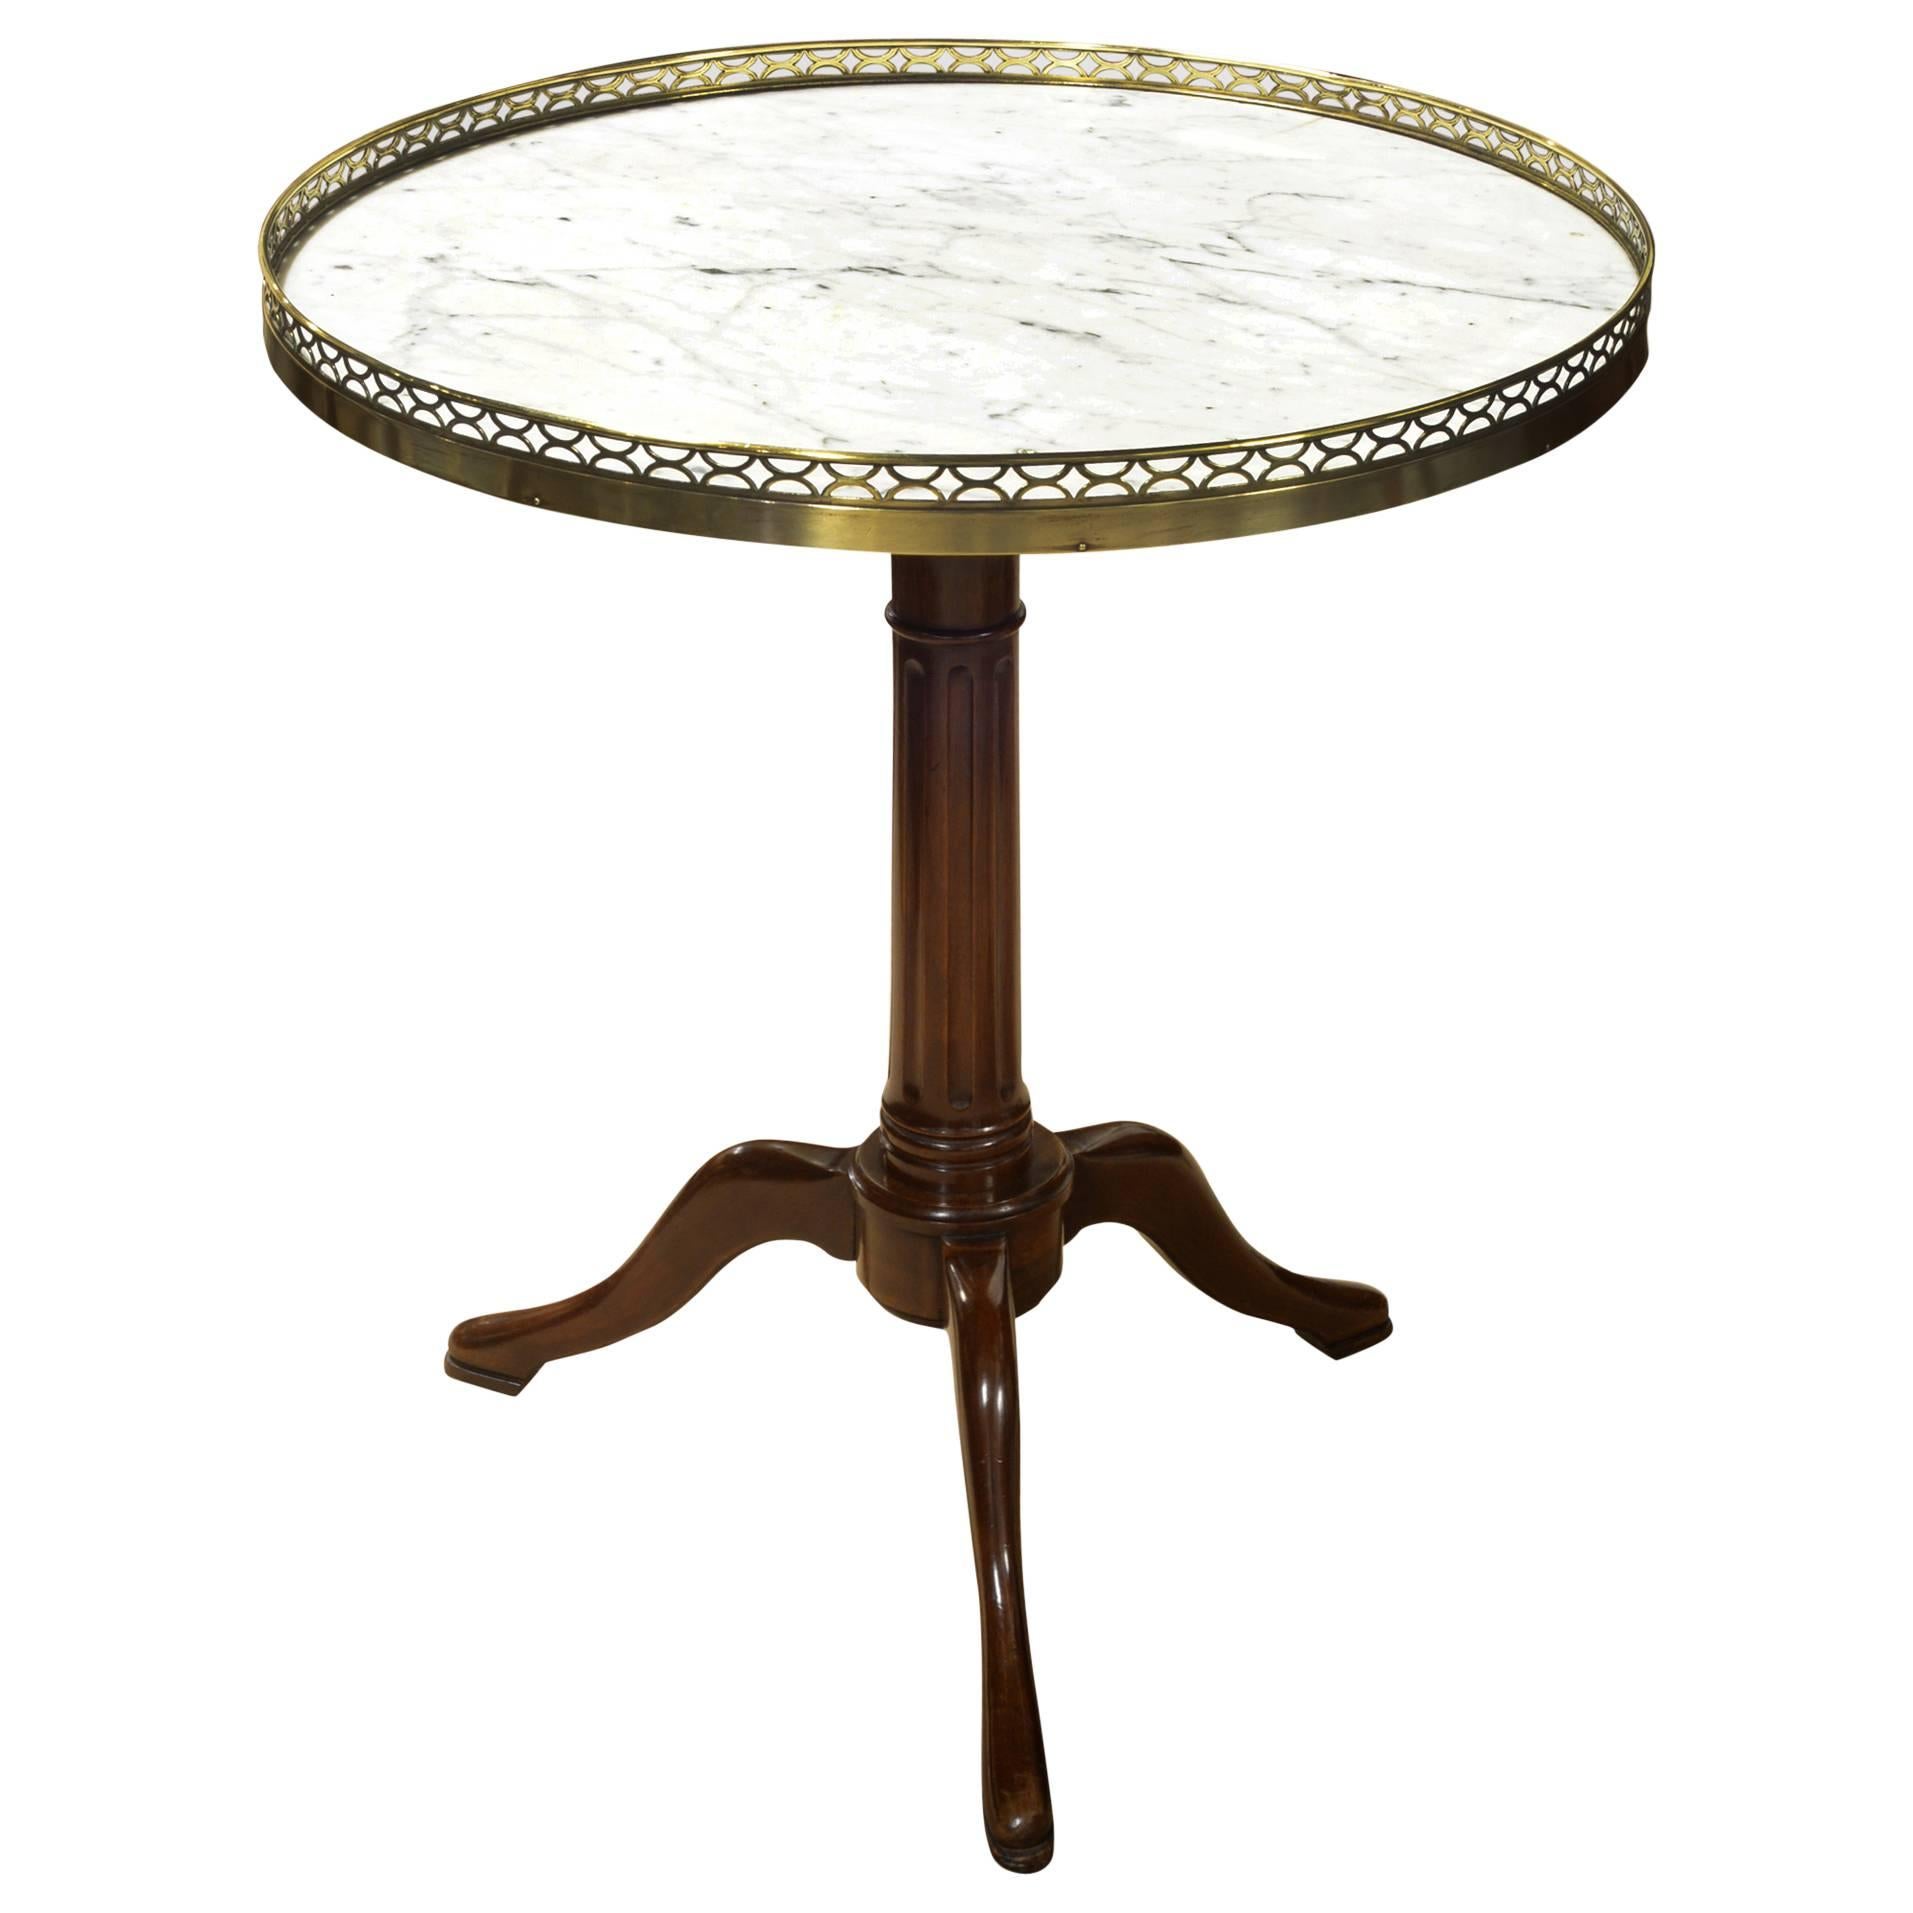 Circular French Gueridon Table with Marble Top